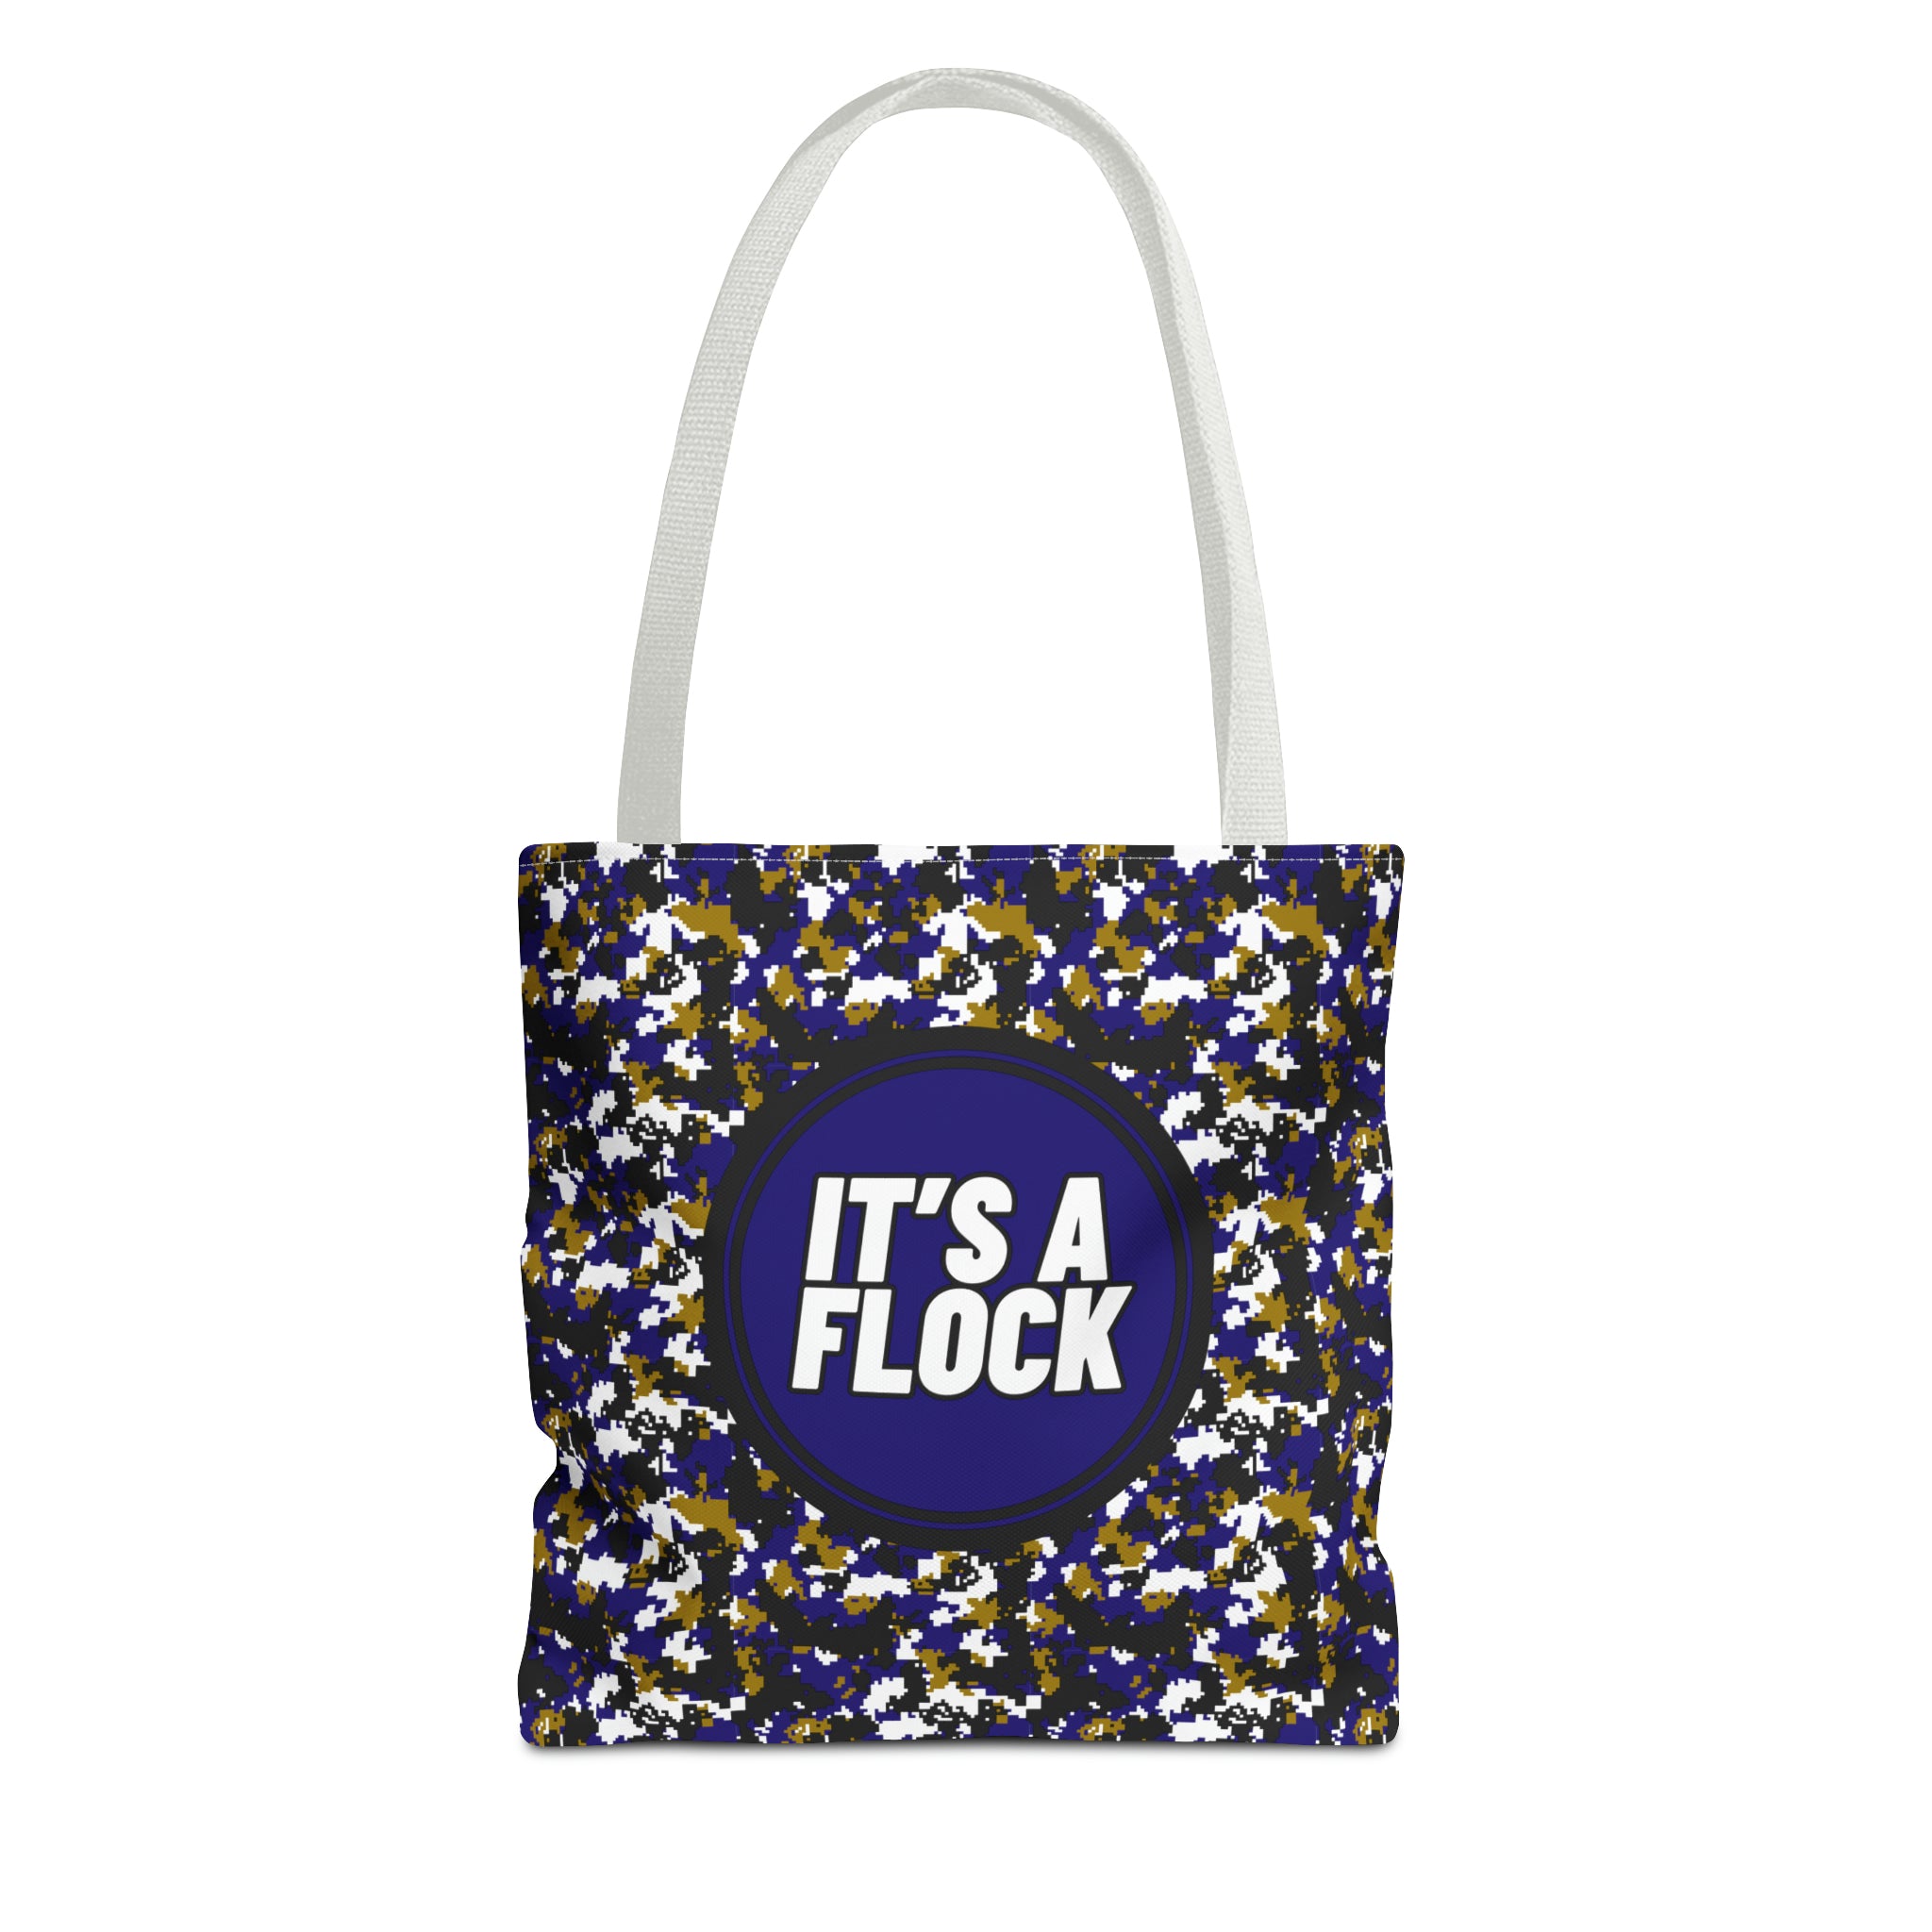 It's a Flock Shopping Tote for Baltimore Sports Fans | Baltimore Flock Utility Bag